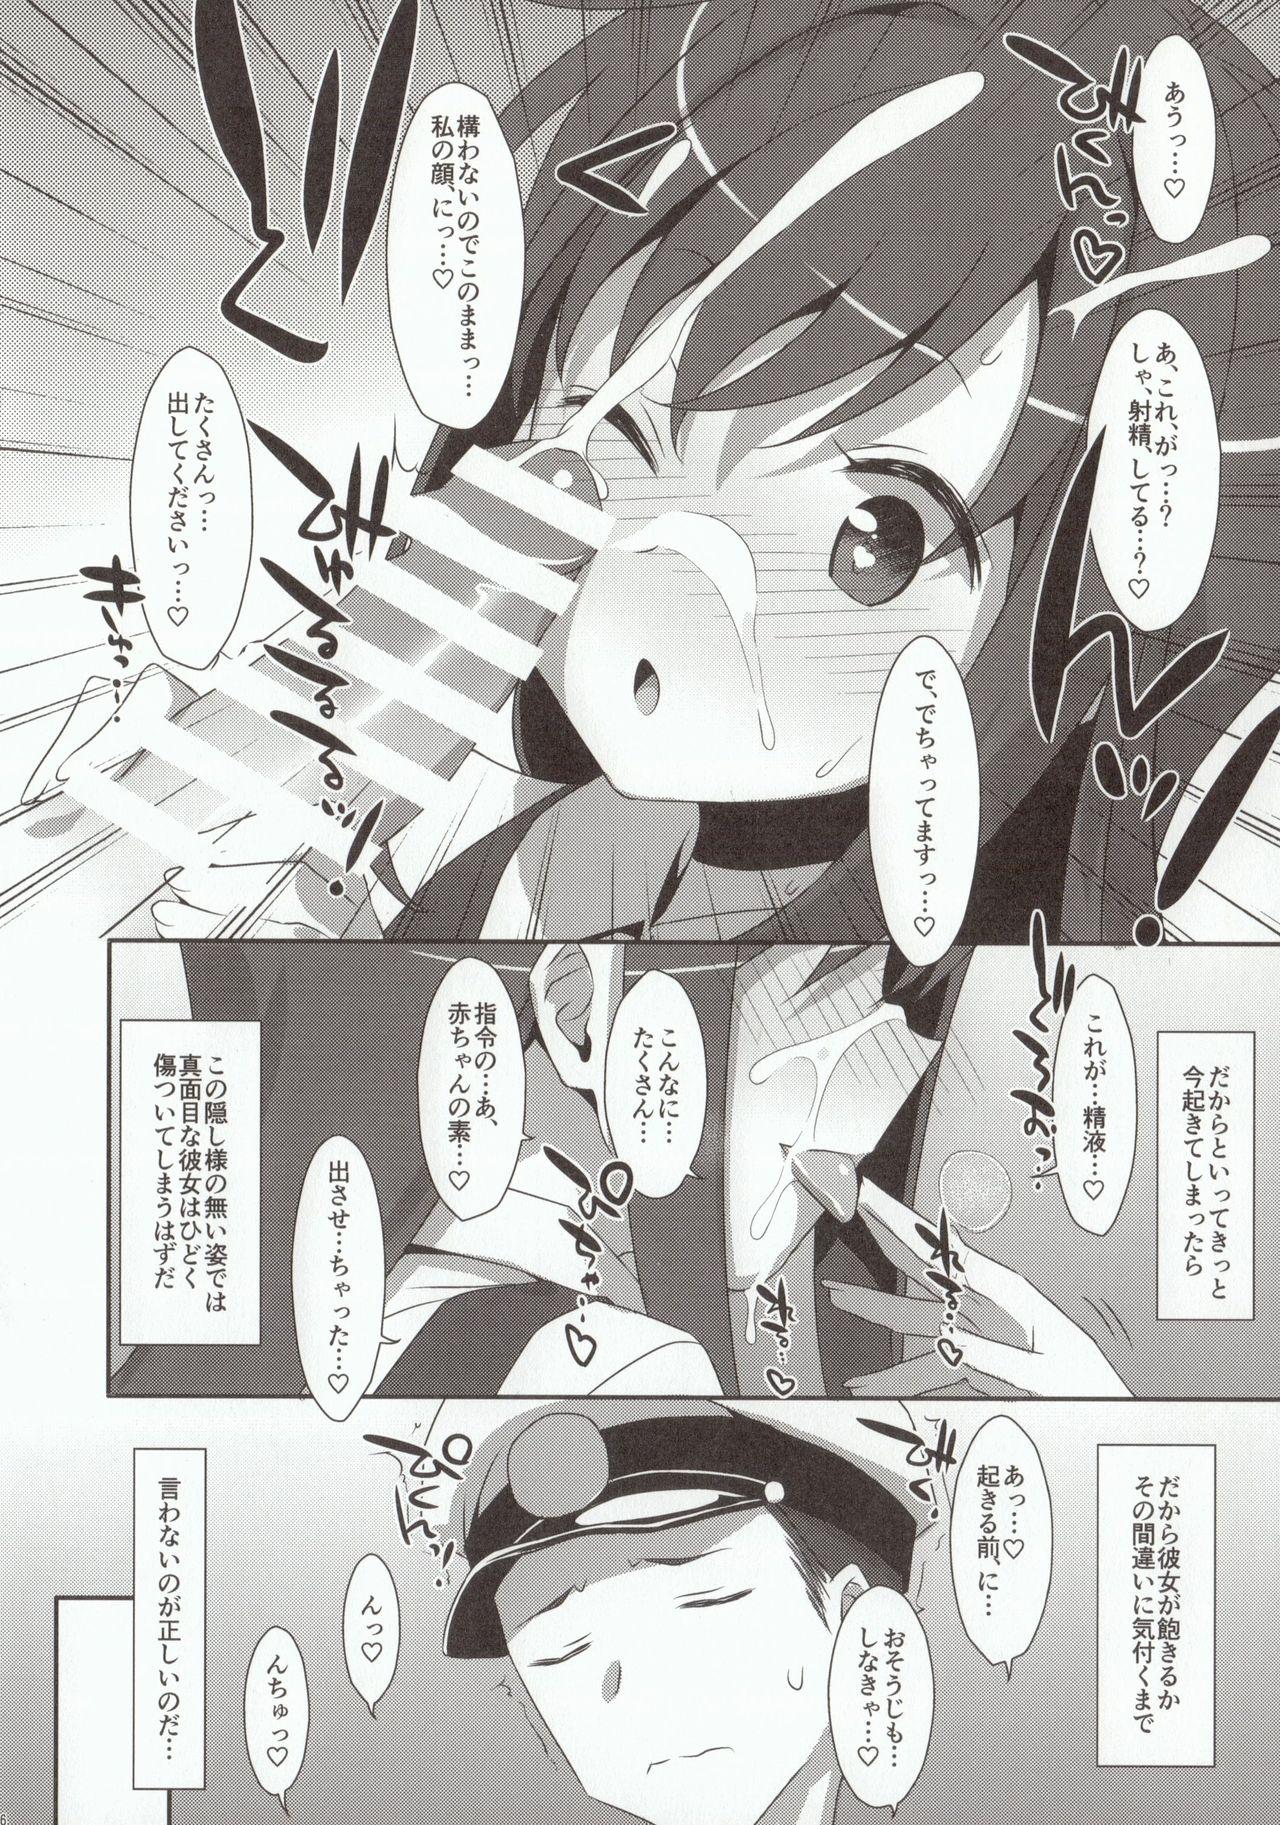 Italian Mischief - Kantai collection Taboo - Page 5